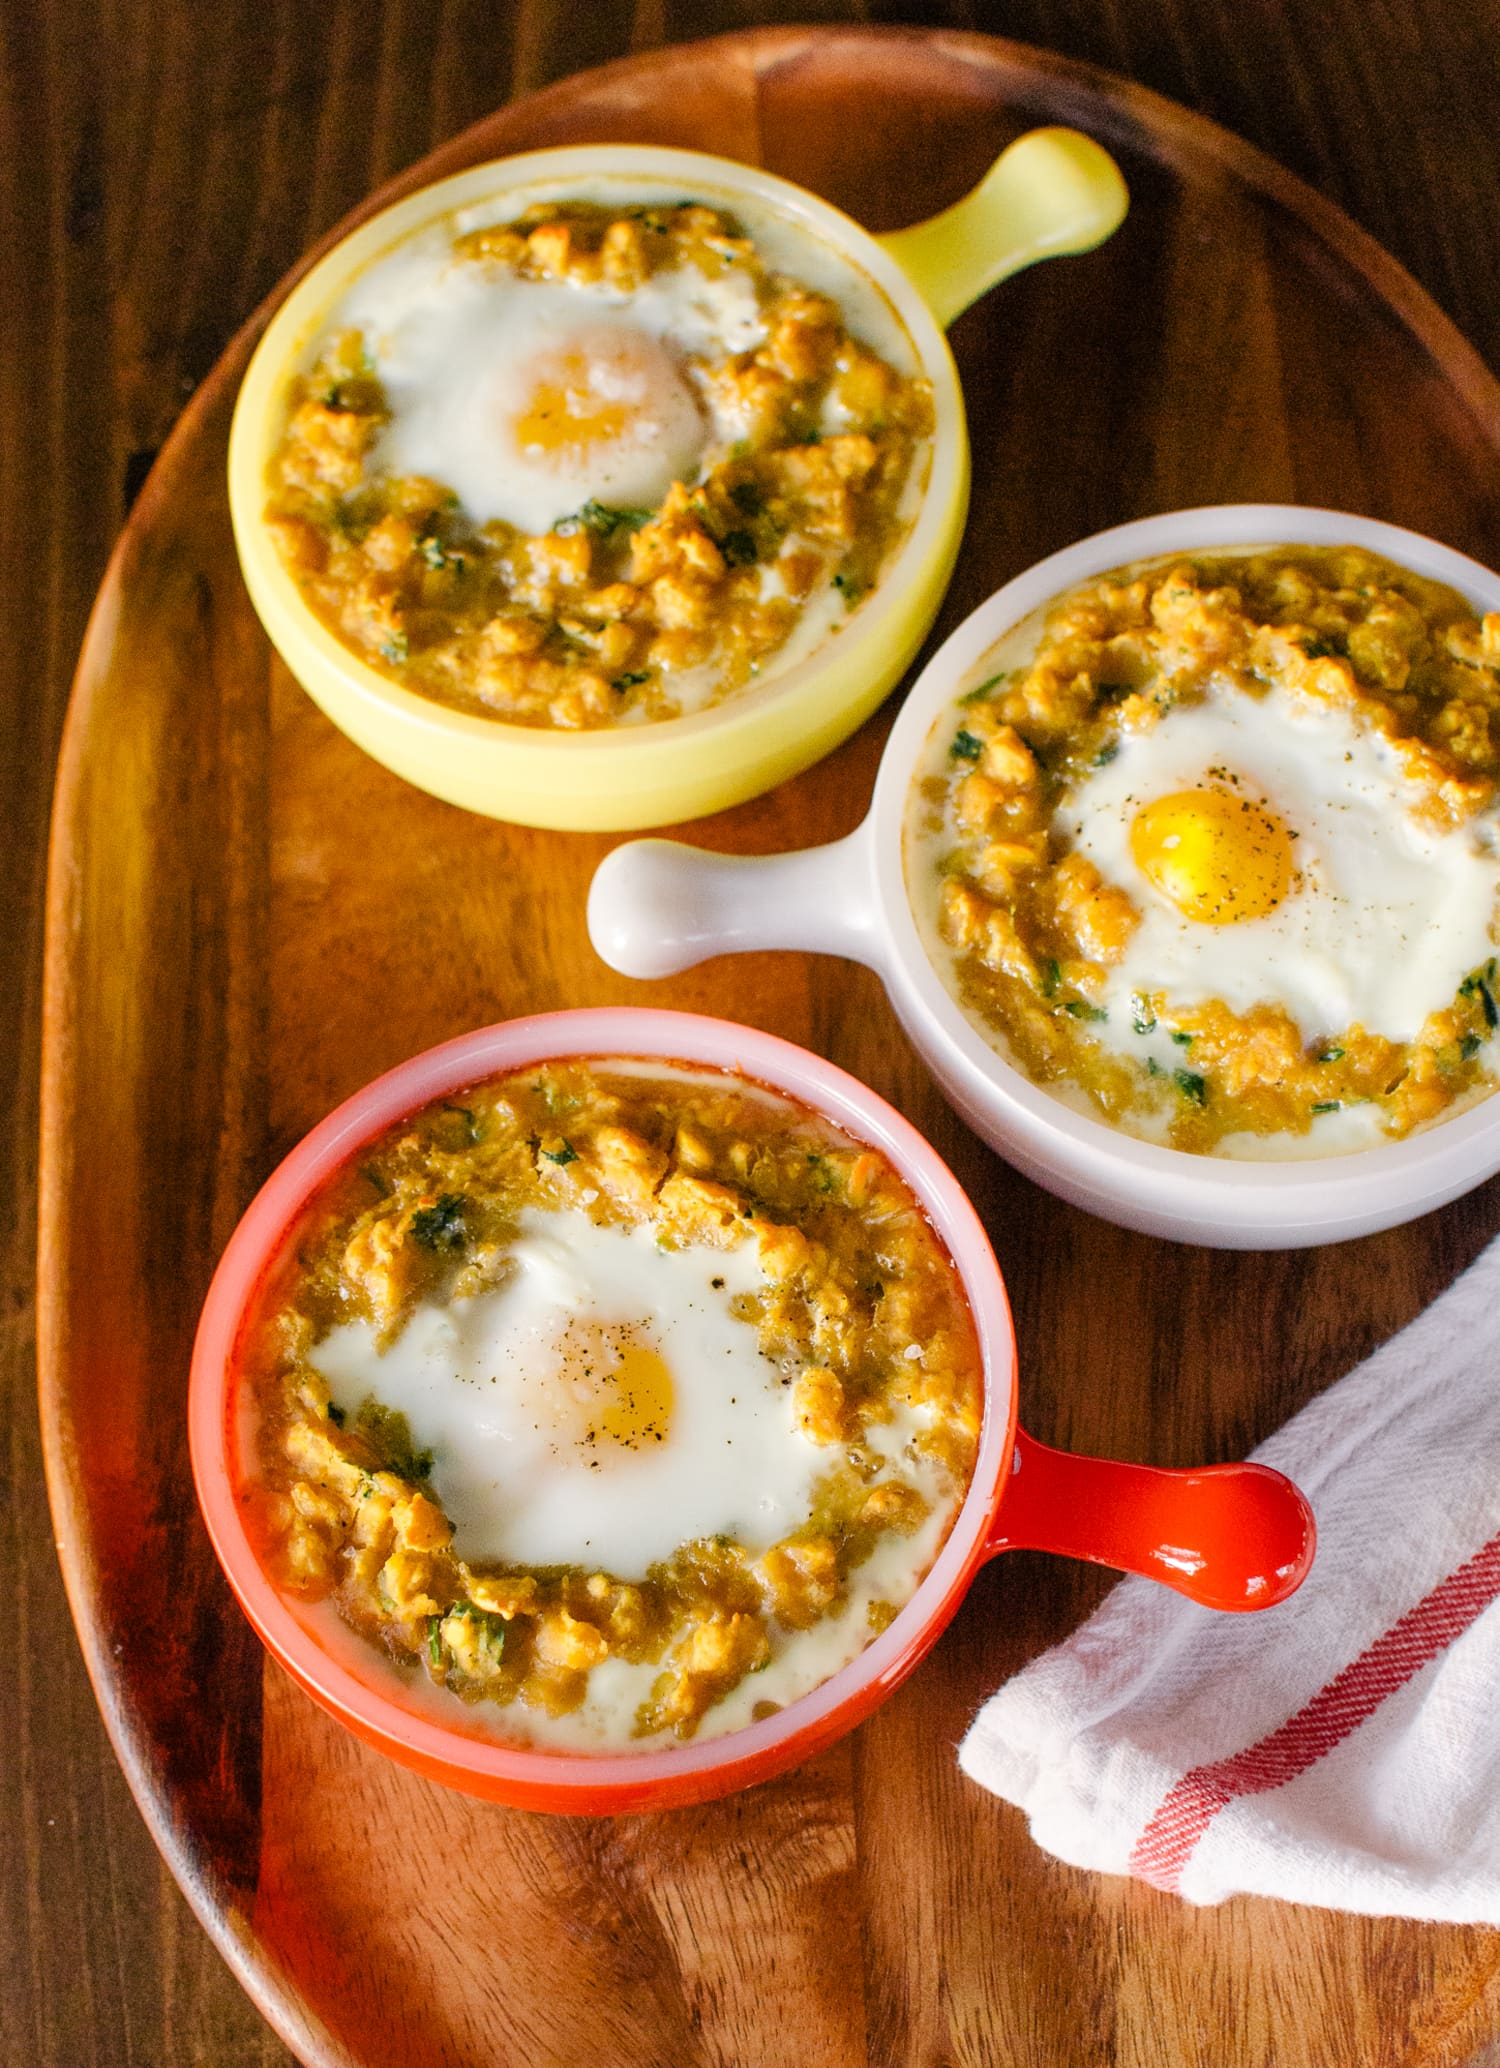 Recipe: Spiced Lentils with Egg | Kitchn